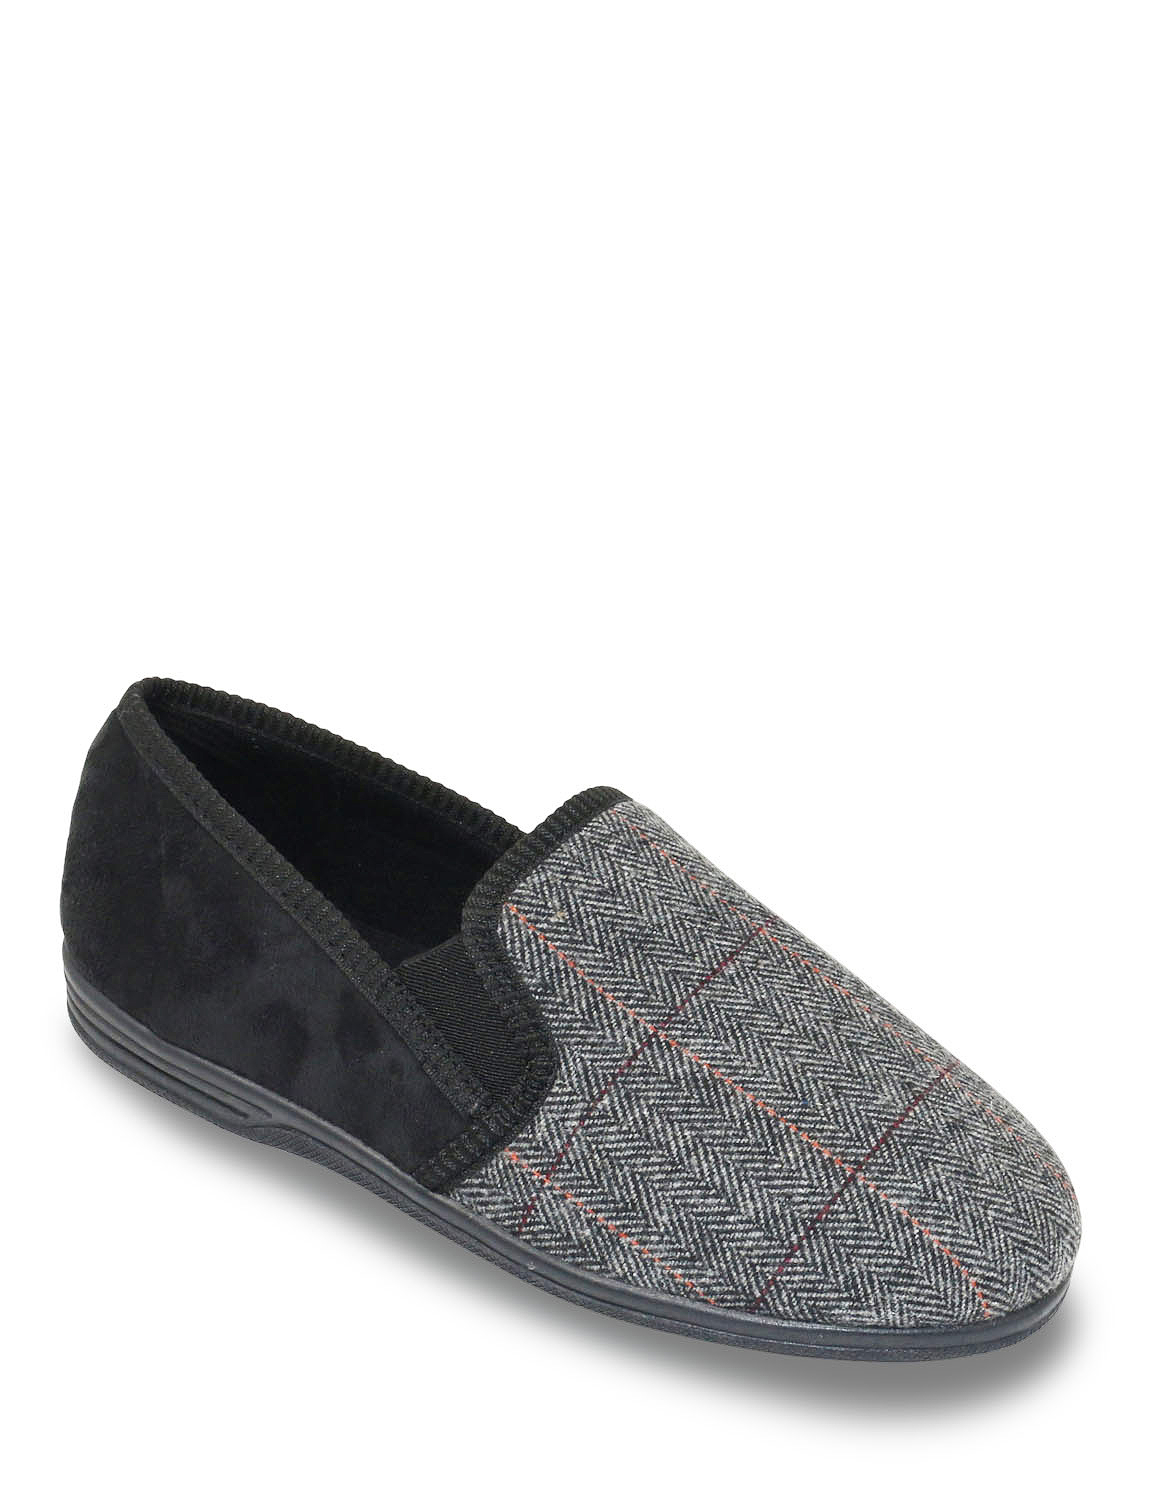 wide fit mens slippers uk